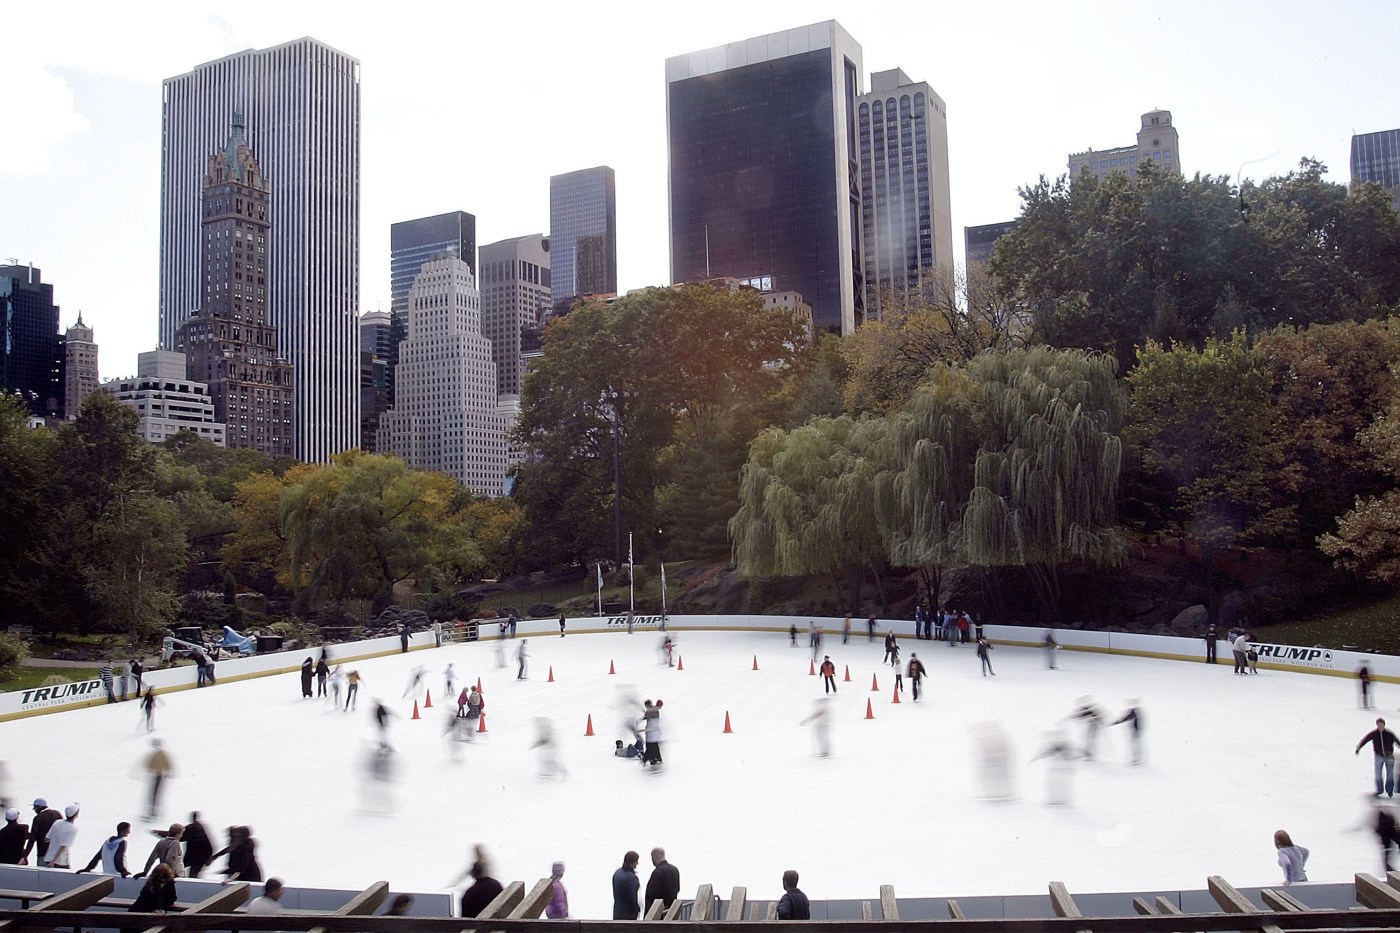 New adaptive ice skating program in NYC's Central Park for service-disabled Veterans and service members.